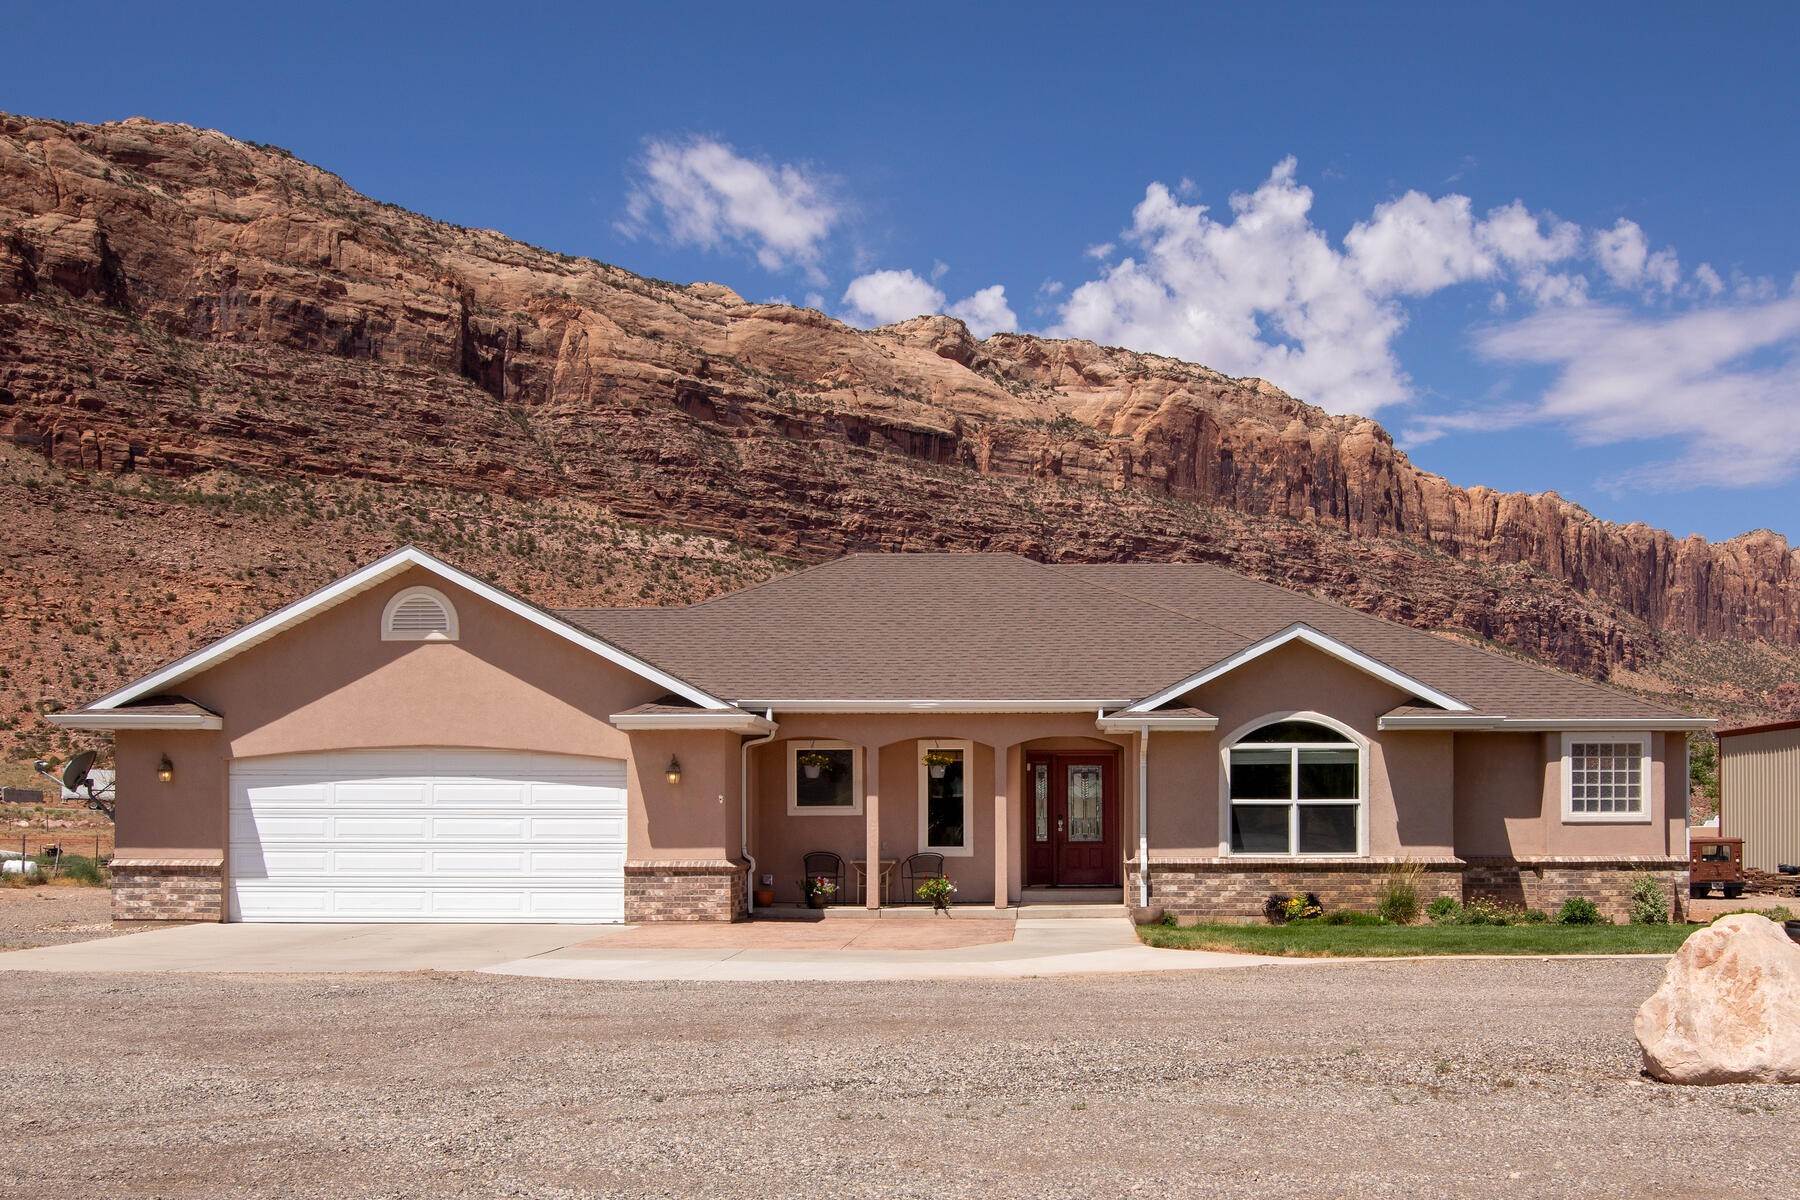 Single Family Homes for Sale at Single Family Home located in The Overnight Accommodation Overlay 42 W Troutt Trail Moab, Utah 84532 United States